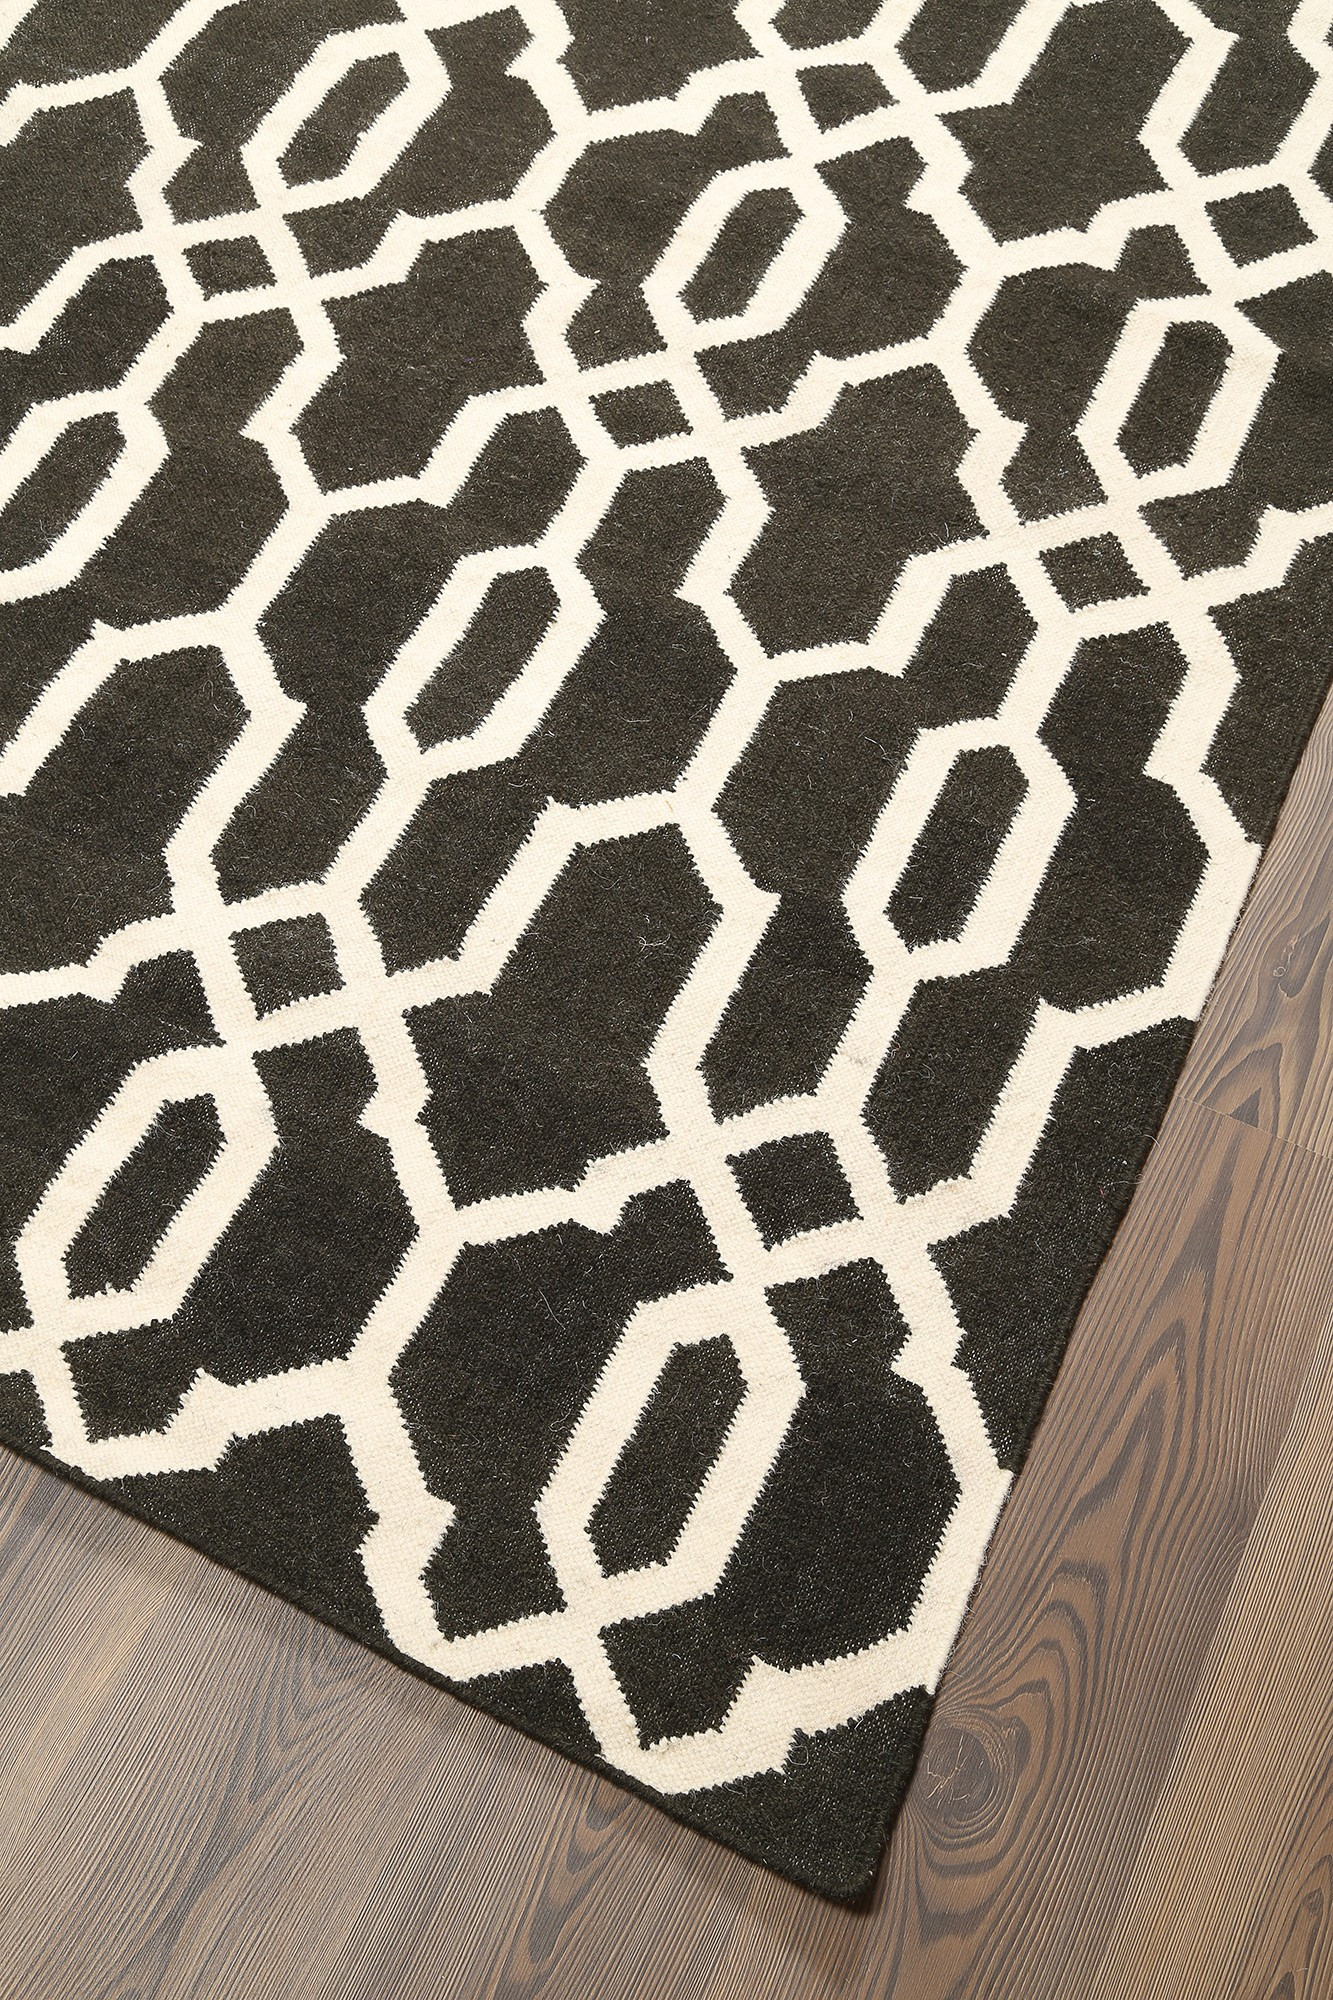 5X8 Rug In Living Room
 Rugs Appealing Smooth 5x8 Rugs For Living Room